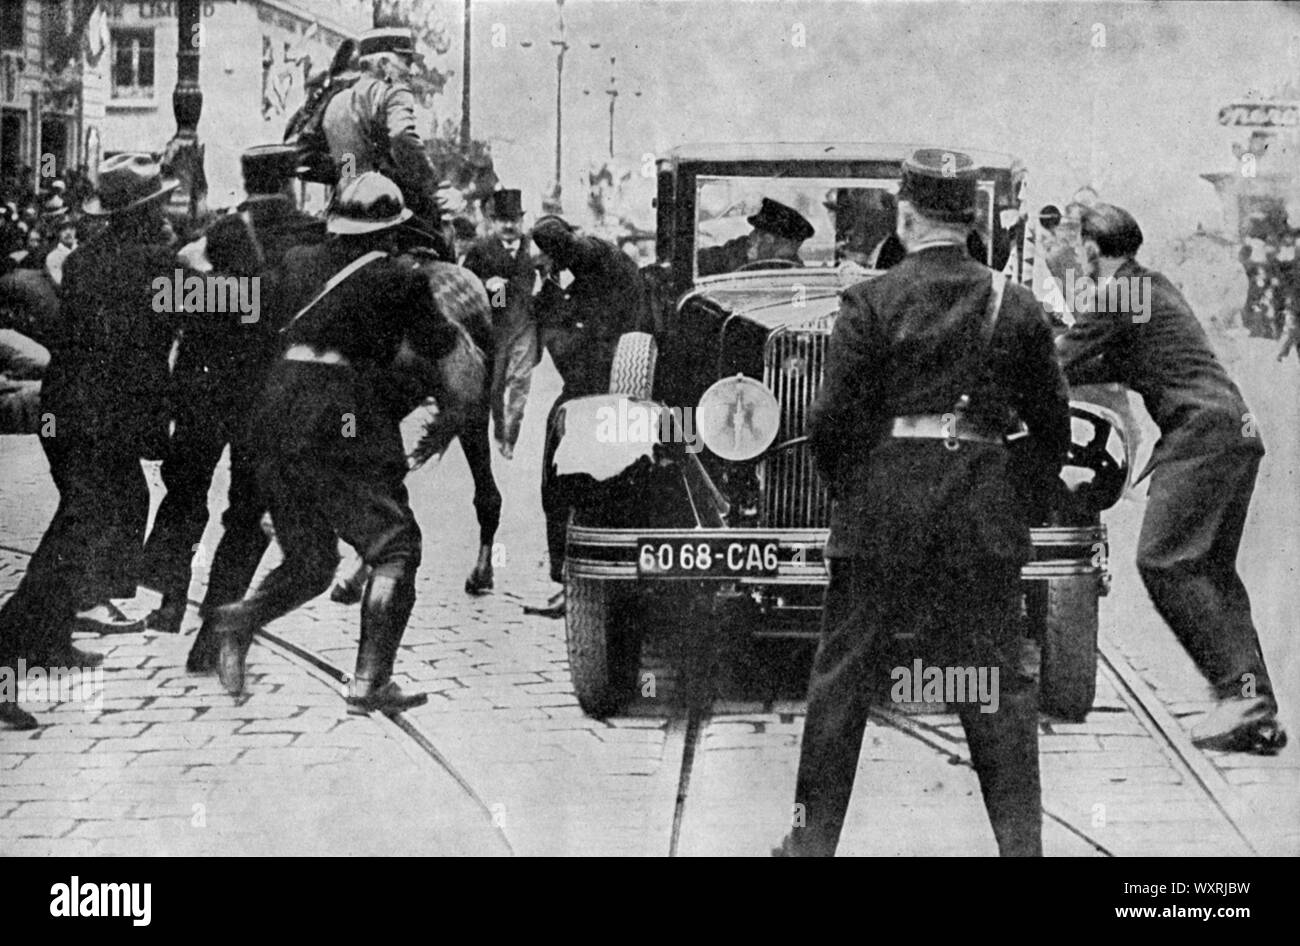 Assassination of King Alexander of Jugo-Slavia, at Marseilles, October 1934. Alexander I (1888-1934), also known as Alexander the Unifier, King of Yugoslavia from 1921 to 1934. He was assassinated in Marseille, France, by Bulgarian assassin Vlado Chernozemski during a state visit. Stock Photo